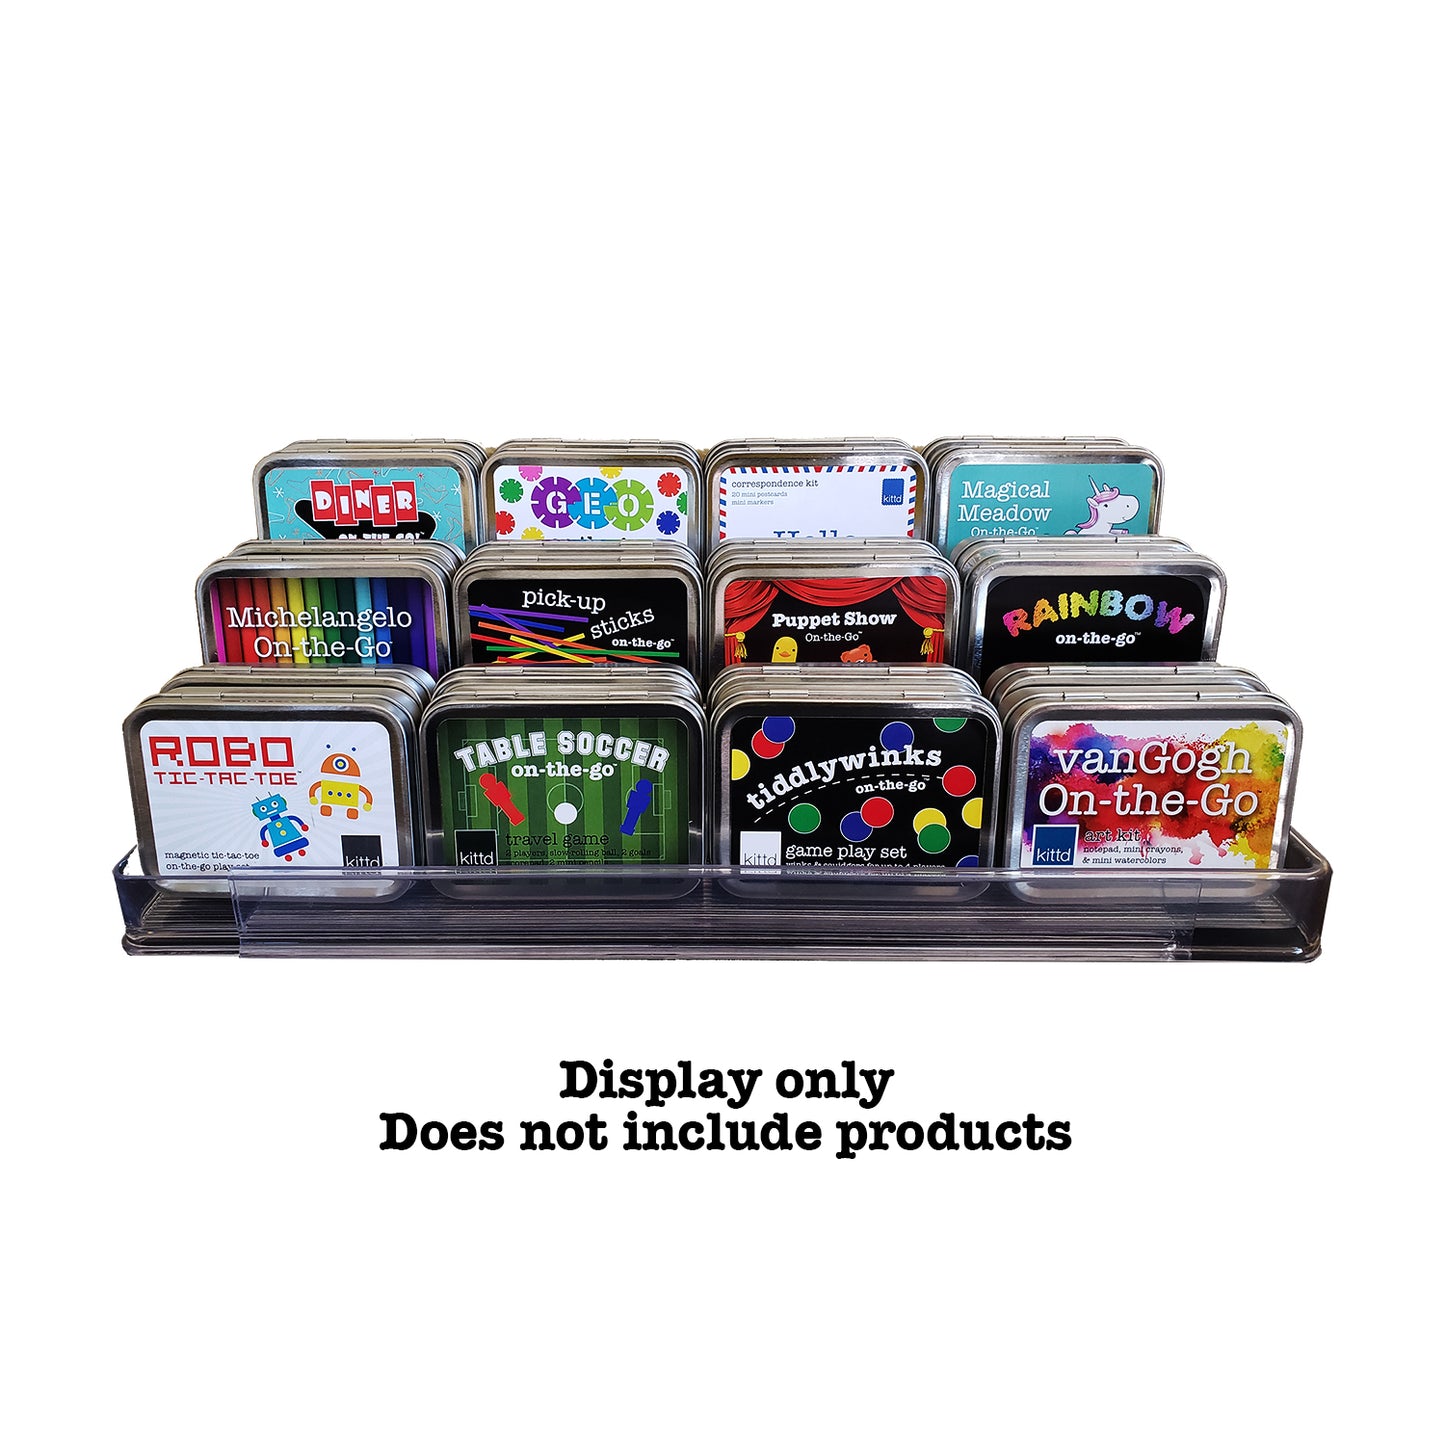 Display - Expandable Display - Holds 18-42 kittd On-the-Go Travel Toys - Display only, no product